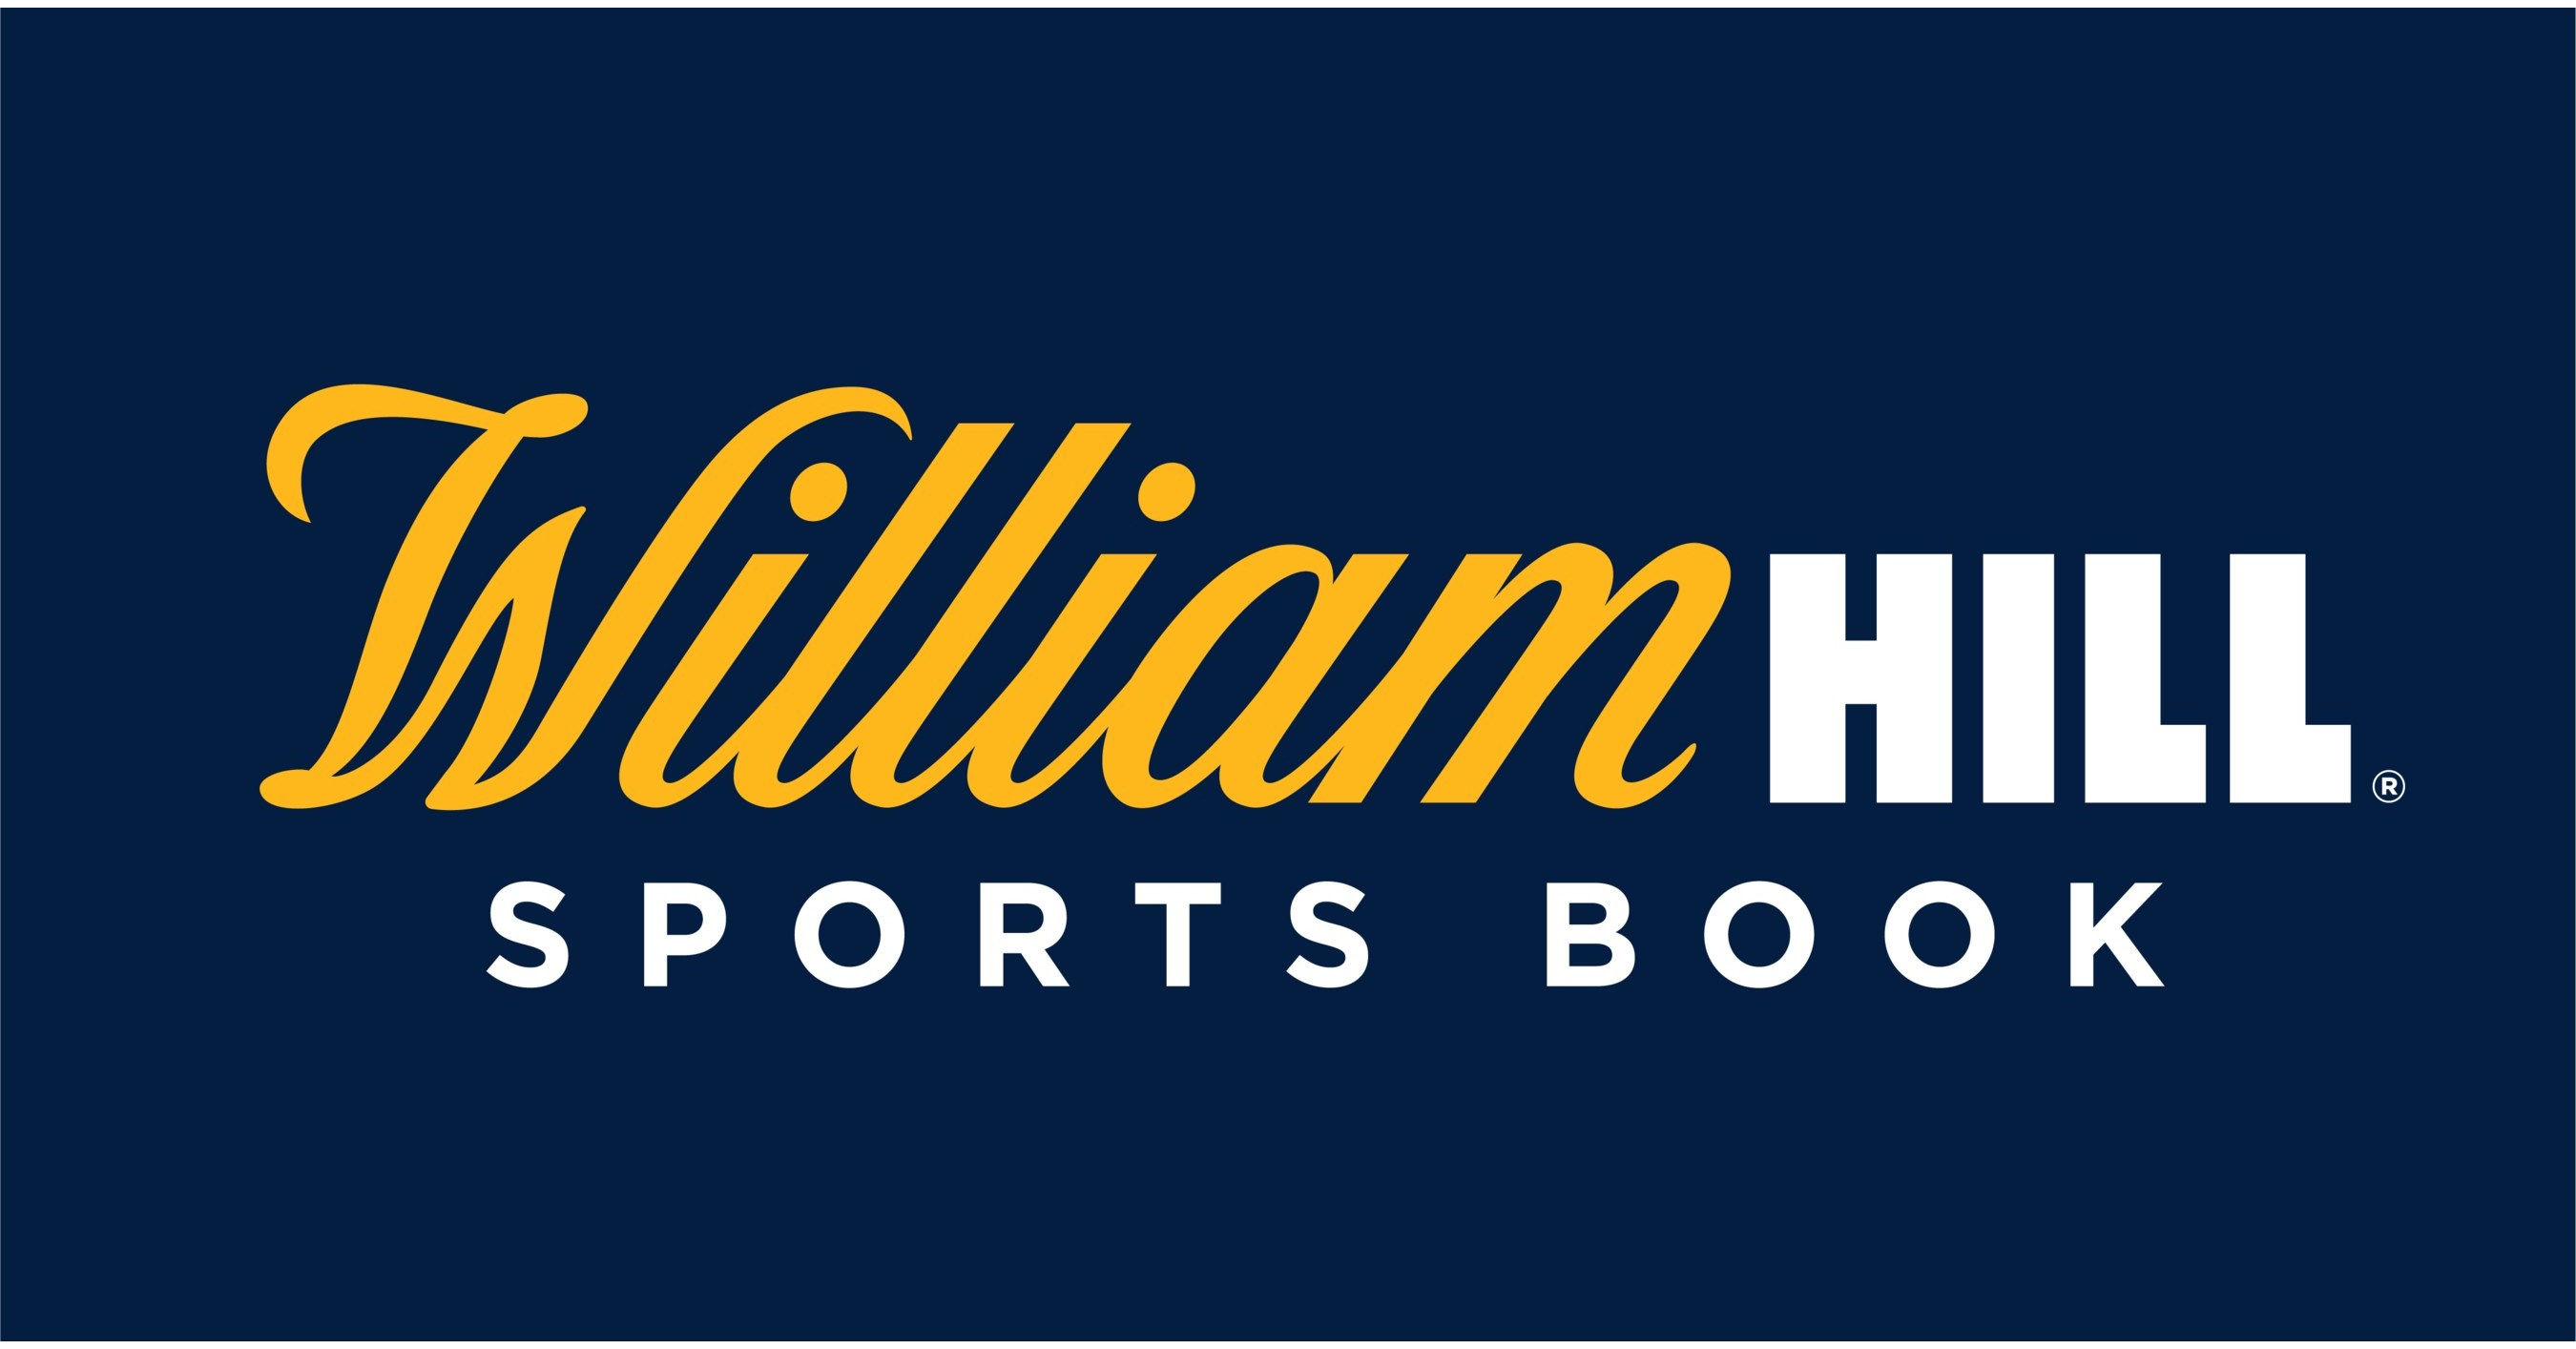 William Hill Mobile Sports Betting App and Website Now Available for  Sign-Ups, Deposits and Betting Anywhere in Iowa